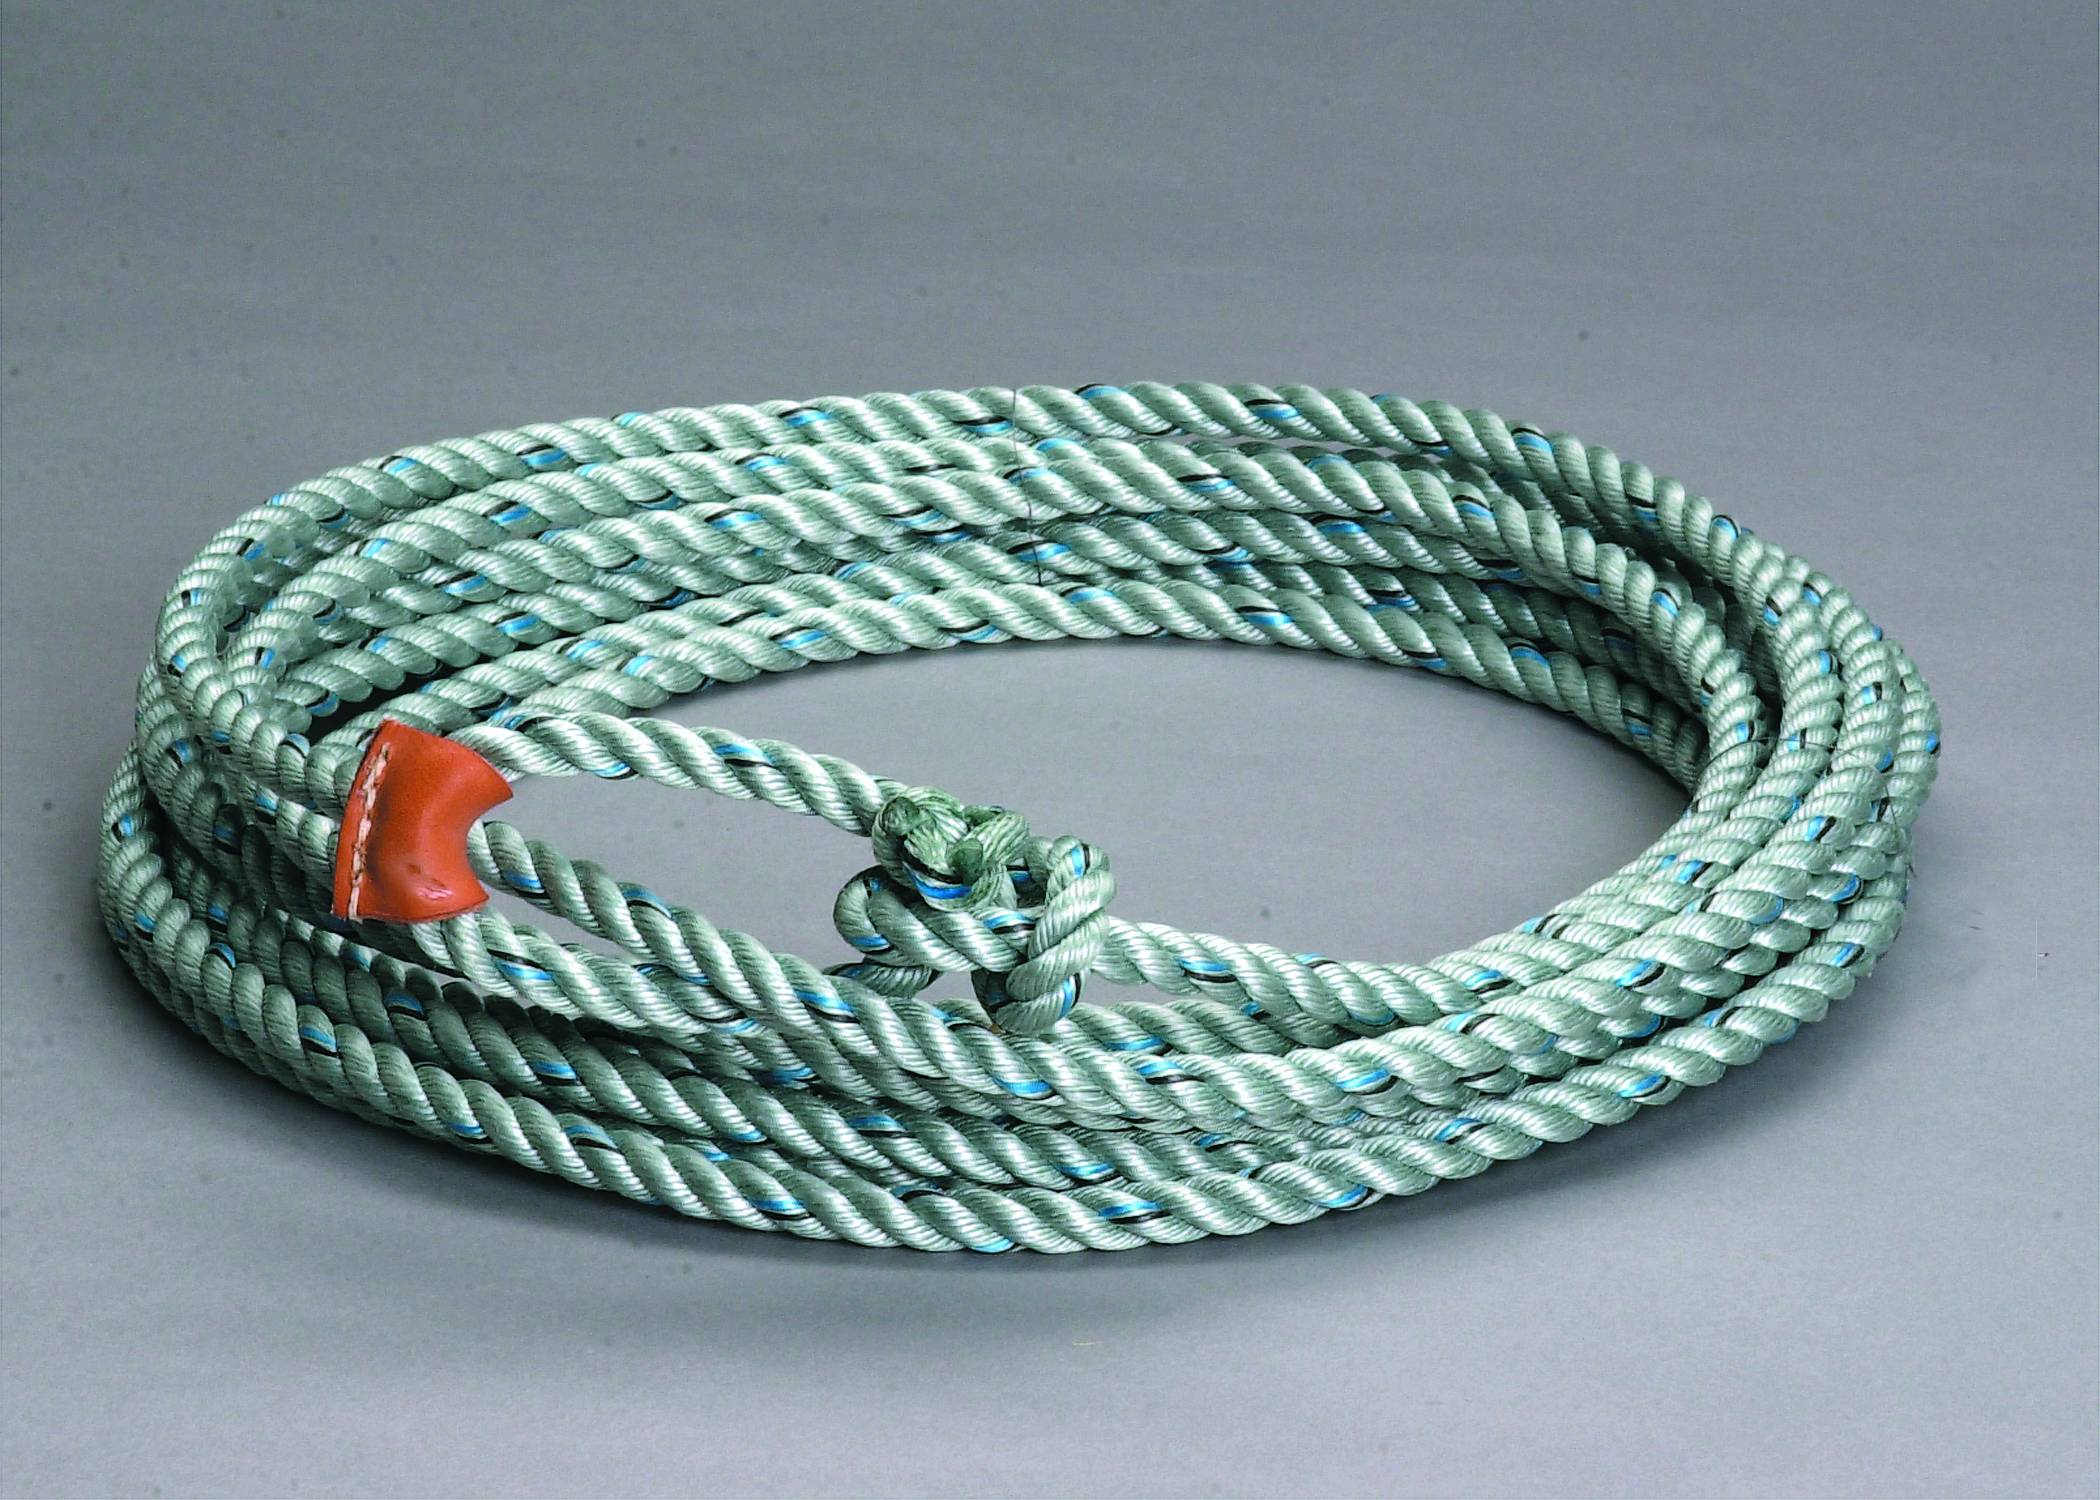 Weaver Leather Ranch Rope with Quick-Release Honda